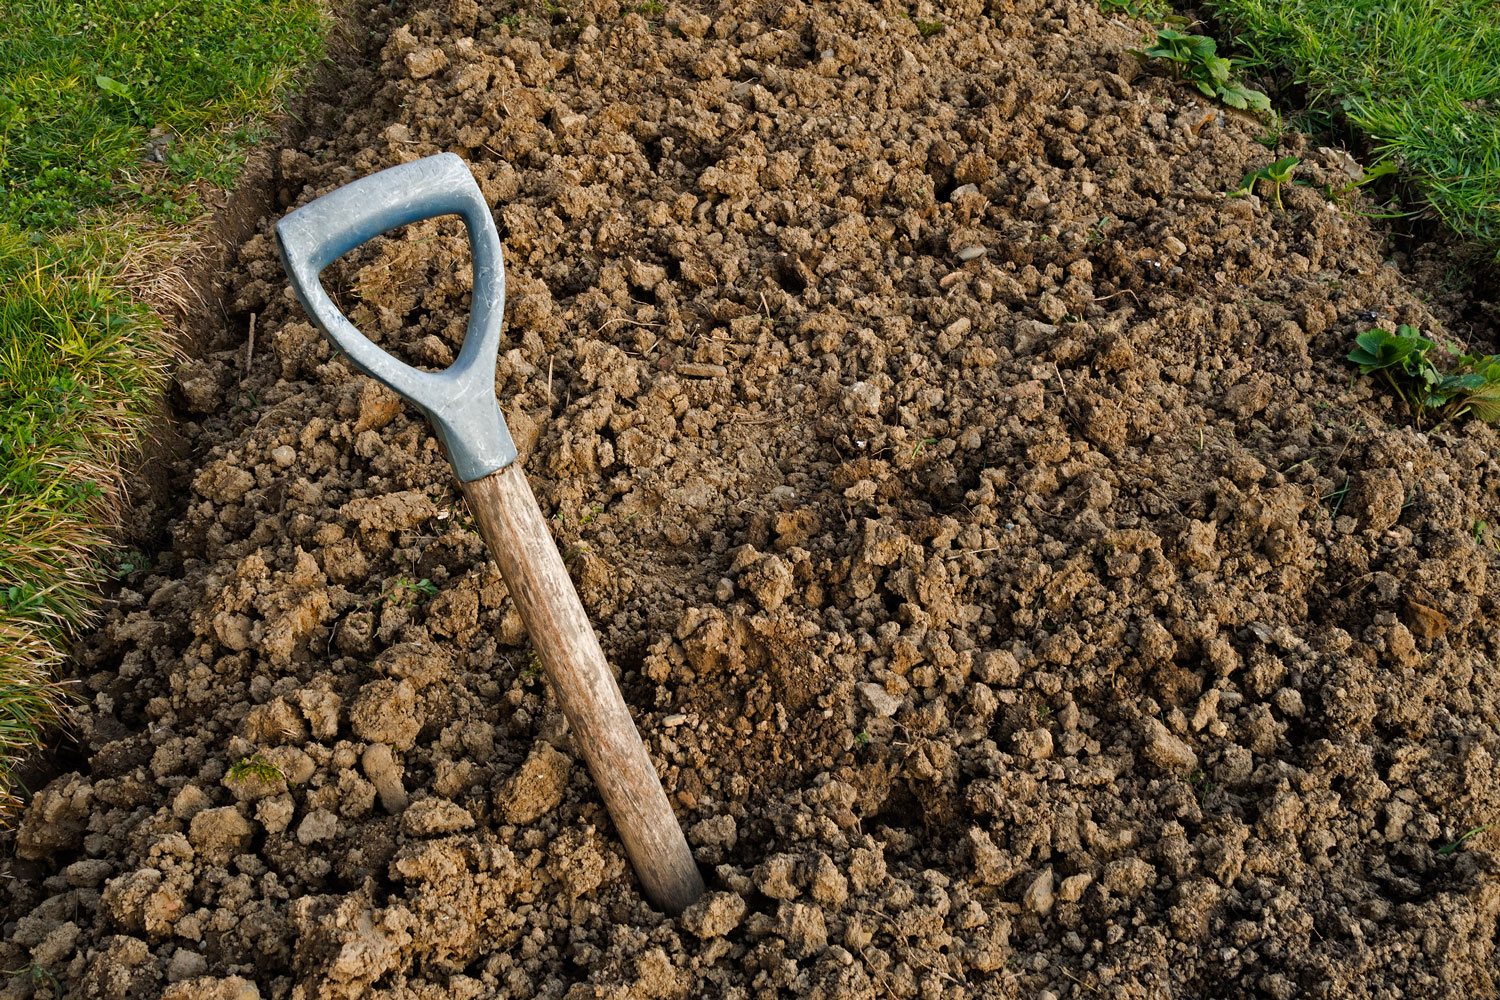 A shovel used for plowing at the garden